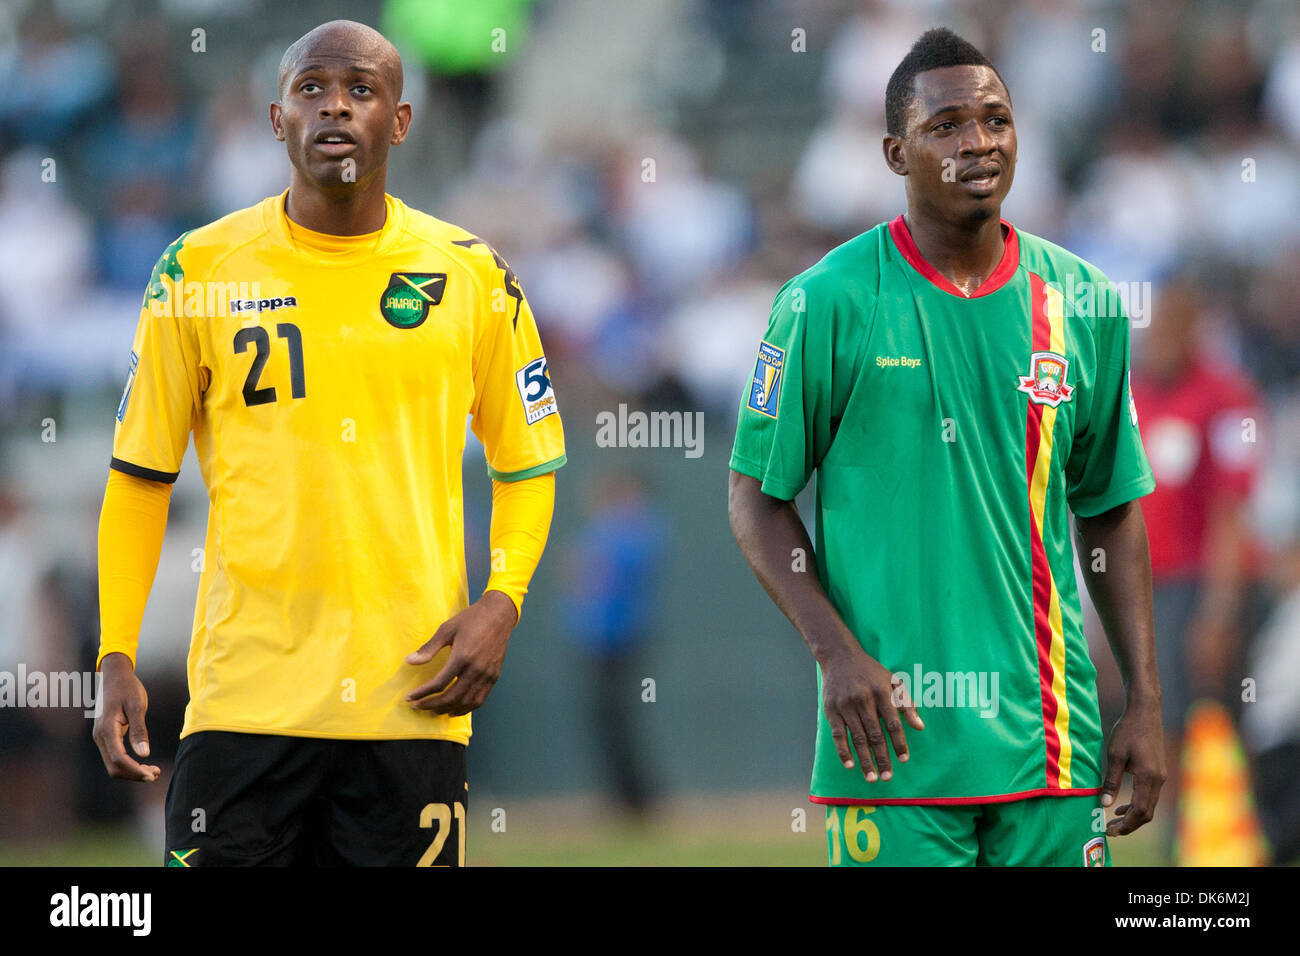 June 6, 2011 - Carson, California, U.S - Jamaica forward Luton Shelton #21 (L) and Greneda midfielder Leon Joseph #16 (R) during the 2011 CONCACAF Gold Cup group B game between Jamaica and Greneda at the Home Depot Center. (Credit Image: © Brandon Parry/Southcreek Global/ZUMAPRESS.com) Stock Photo